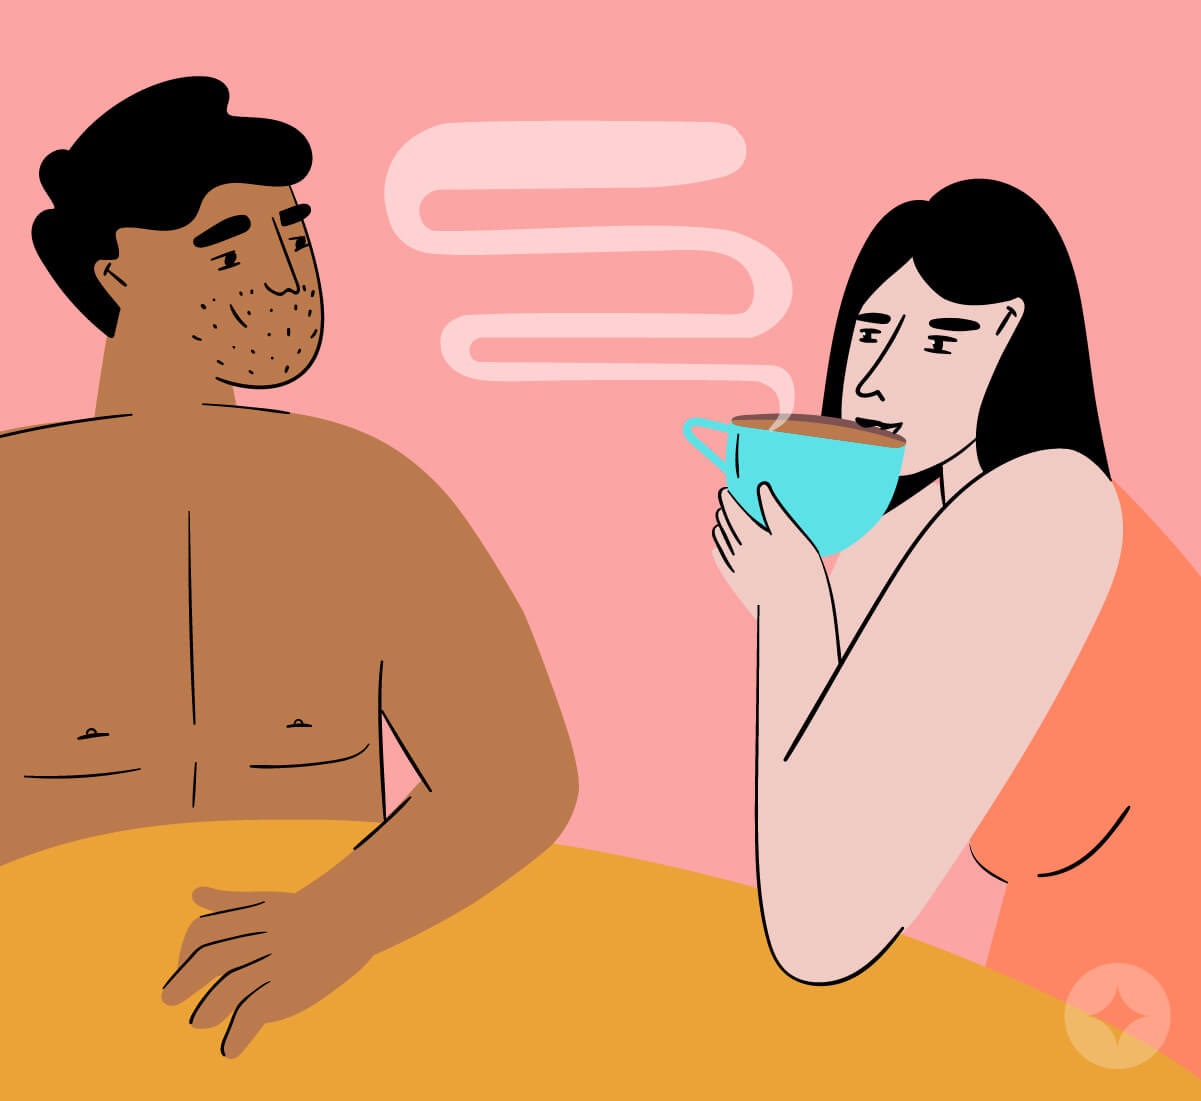 A creative temperature play idea is to use hot drinks to warm up your mouth and then pleasure your partner